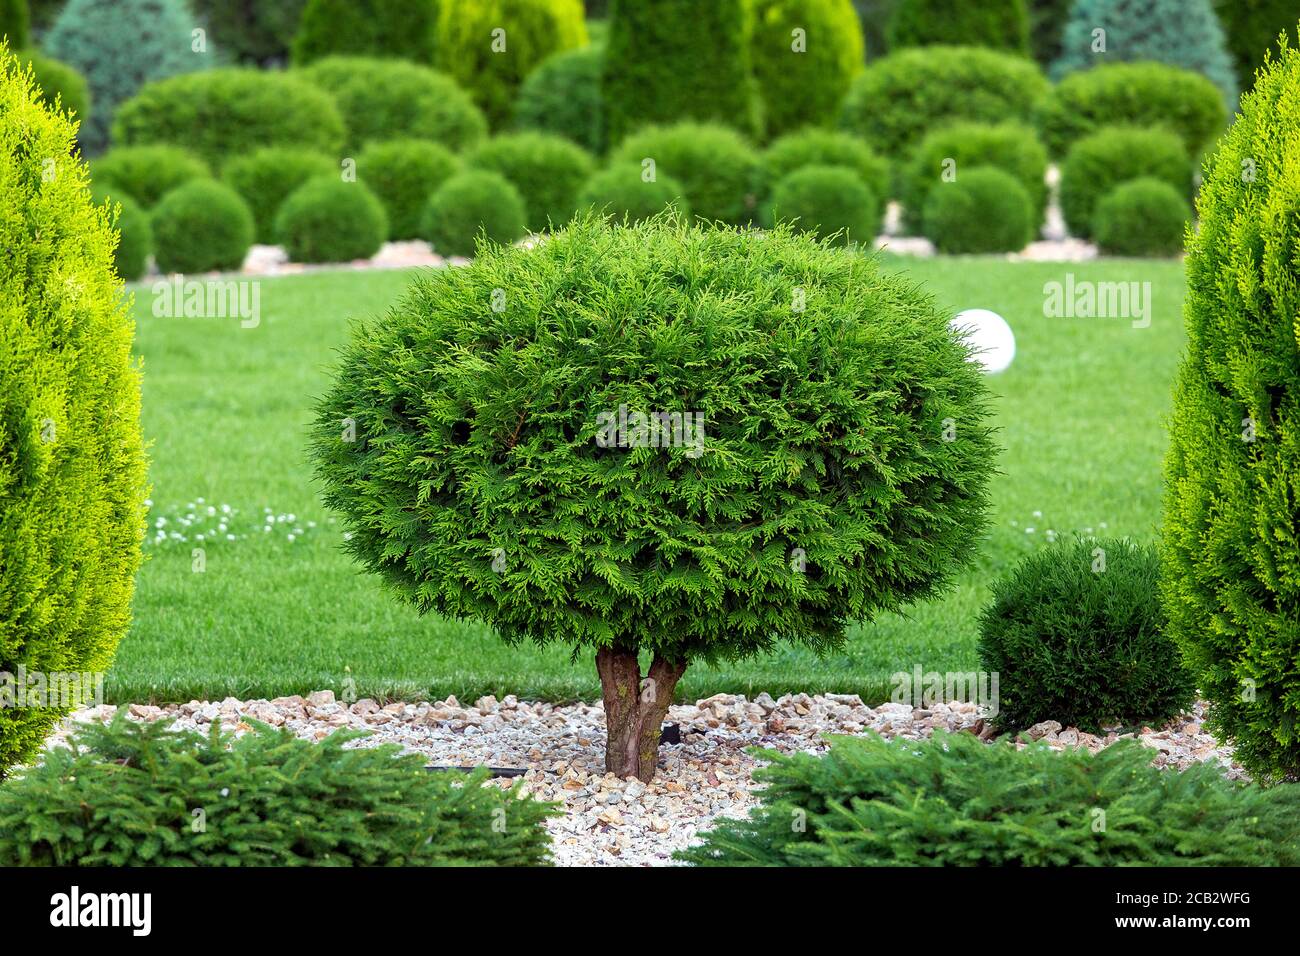 molded sheared evergreen thuja tree in the backyard with stone mulch and green lawn in the garden, greenry park landscape design. Stock Photo